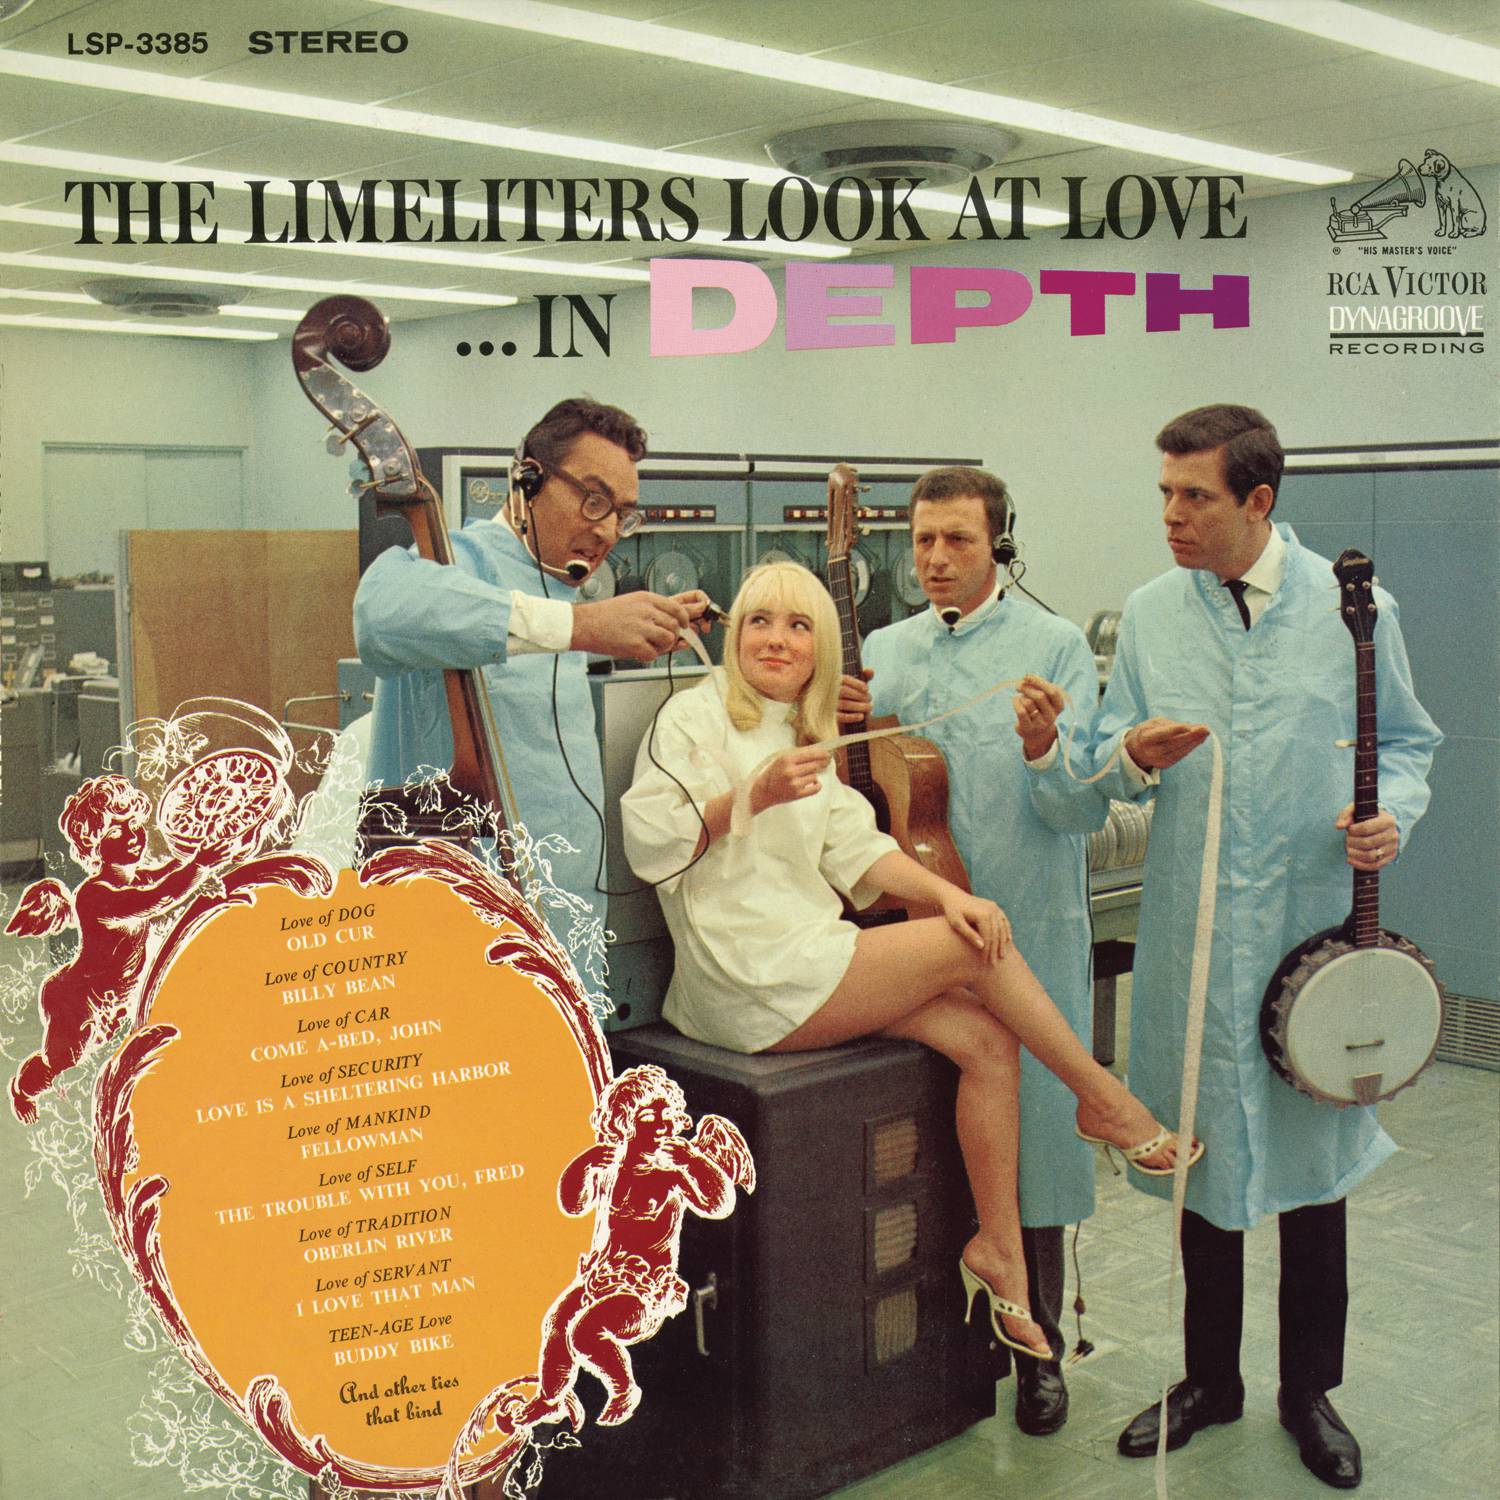 The Limeliters - Look At Love… In Depth (1965/2015) [AcousticSounds FLAC 24bit/192kHz]